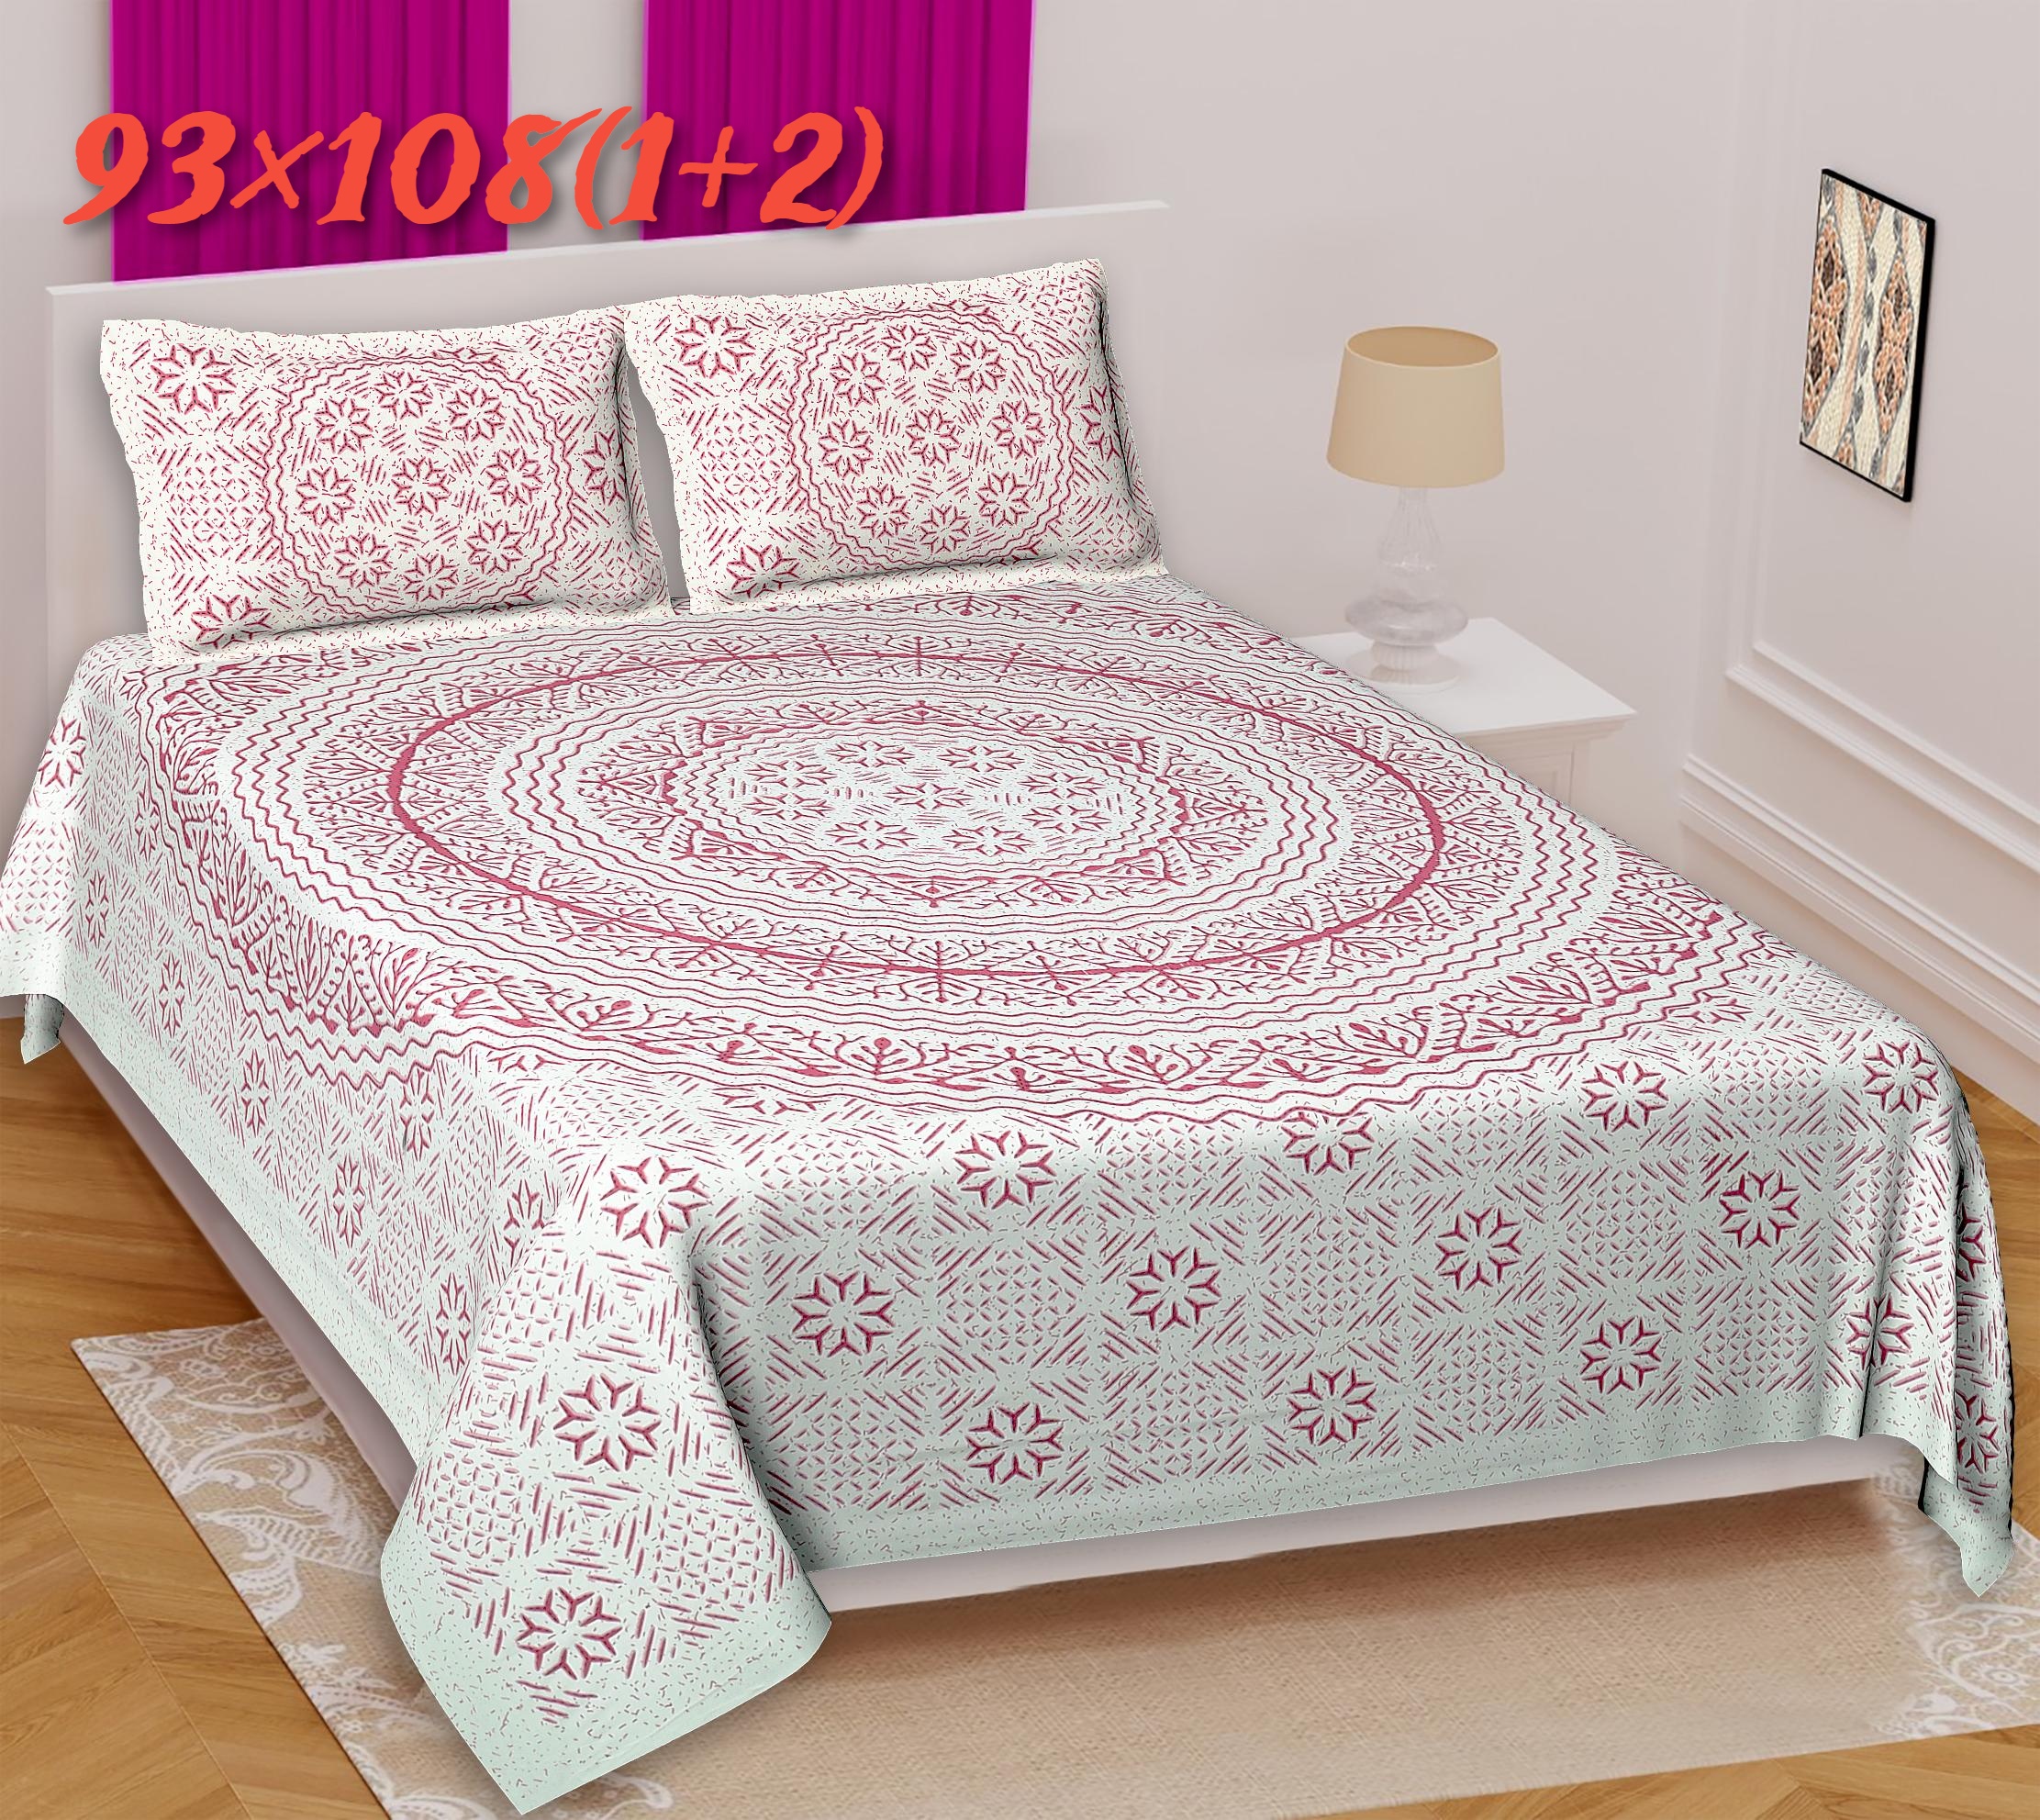 93x108 bed sheet with pillow cover (55)